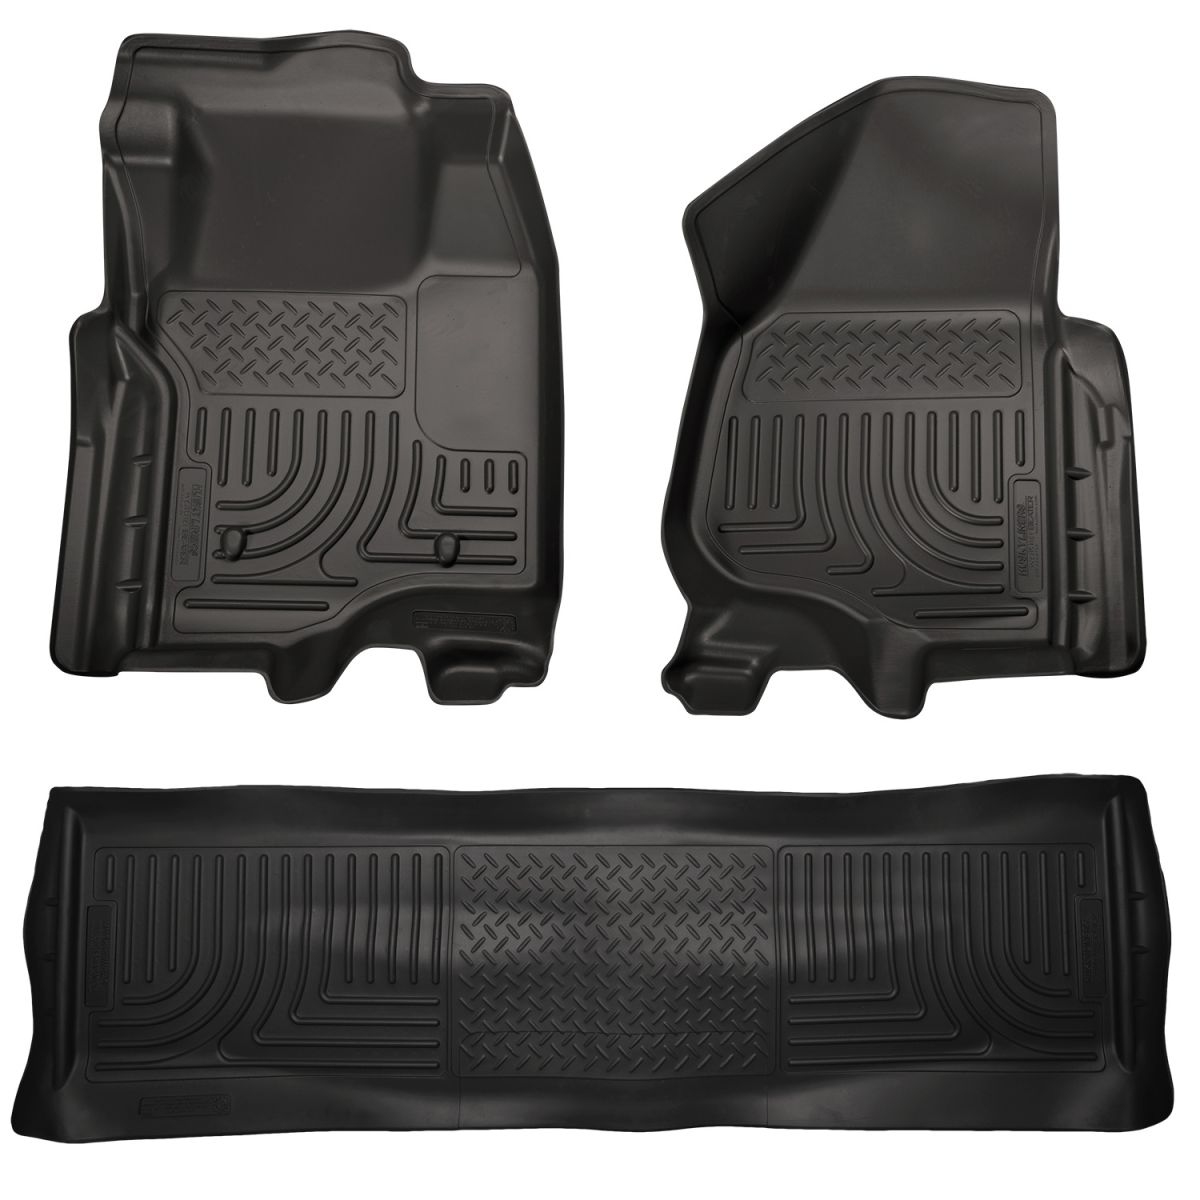 Husky Liners - Husky Liners Floor Liners Front & 2nd Row 11-12 F Series Super Duty Crew Cab (Footwell Coverage) WeatherBeater-Black 98711